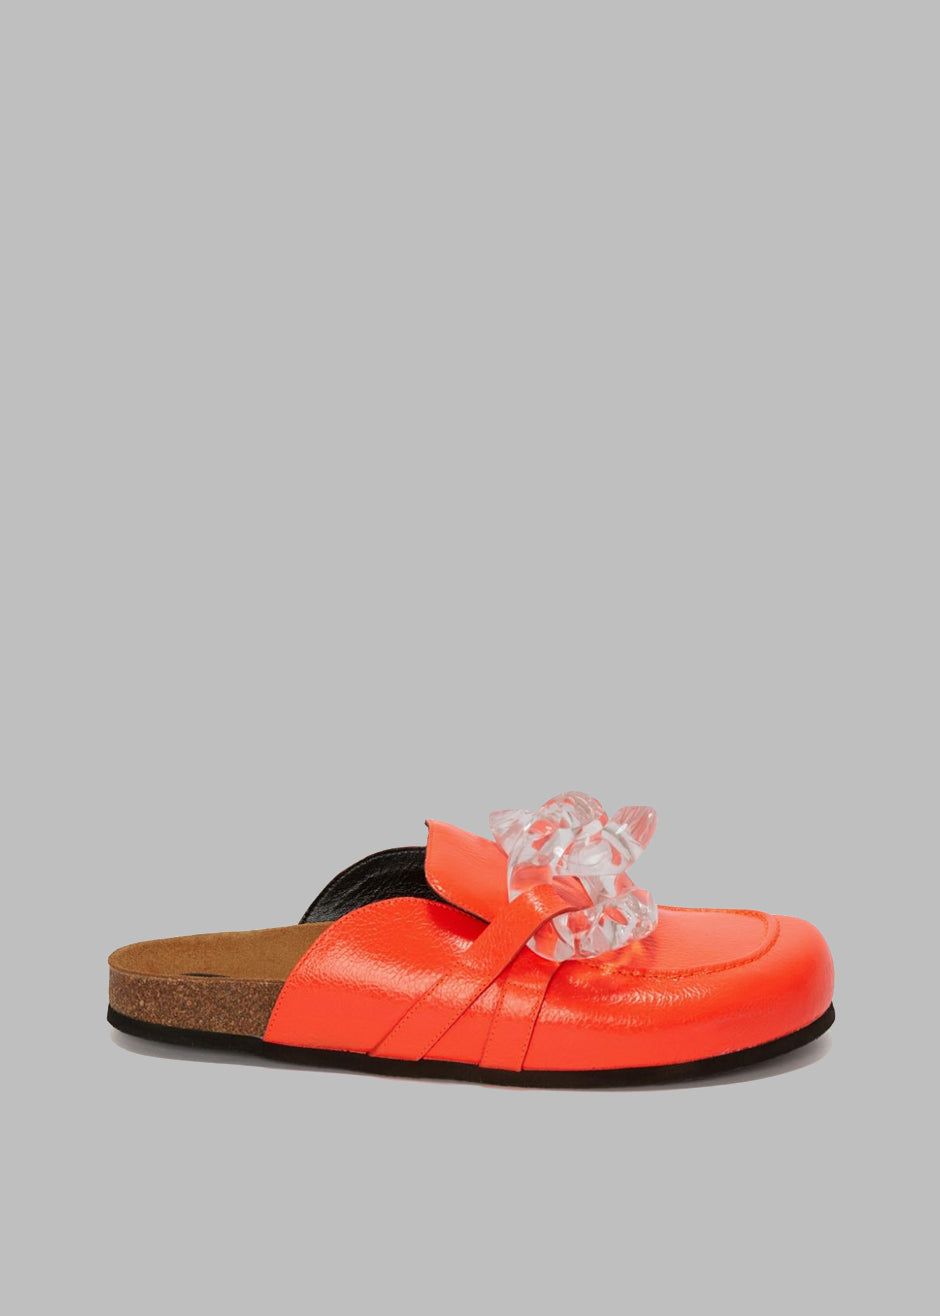 JW Anderson Chain Loafer Mules - Orange - 2